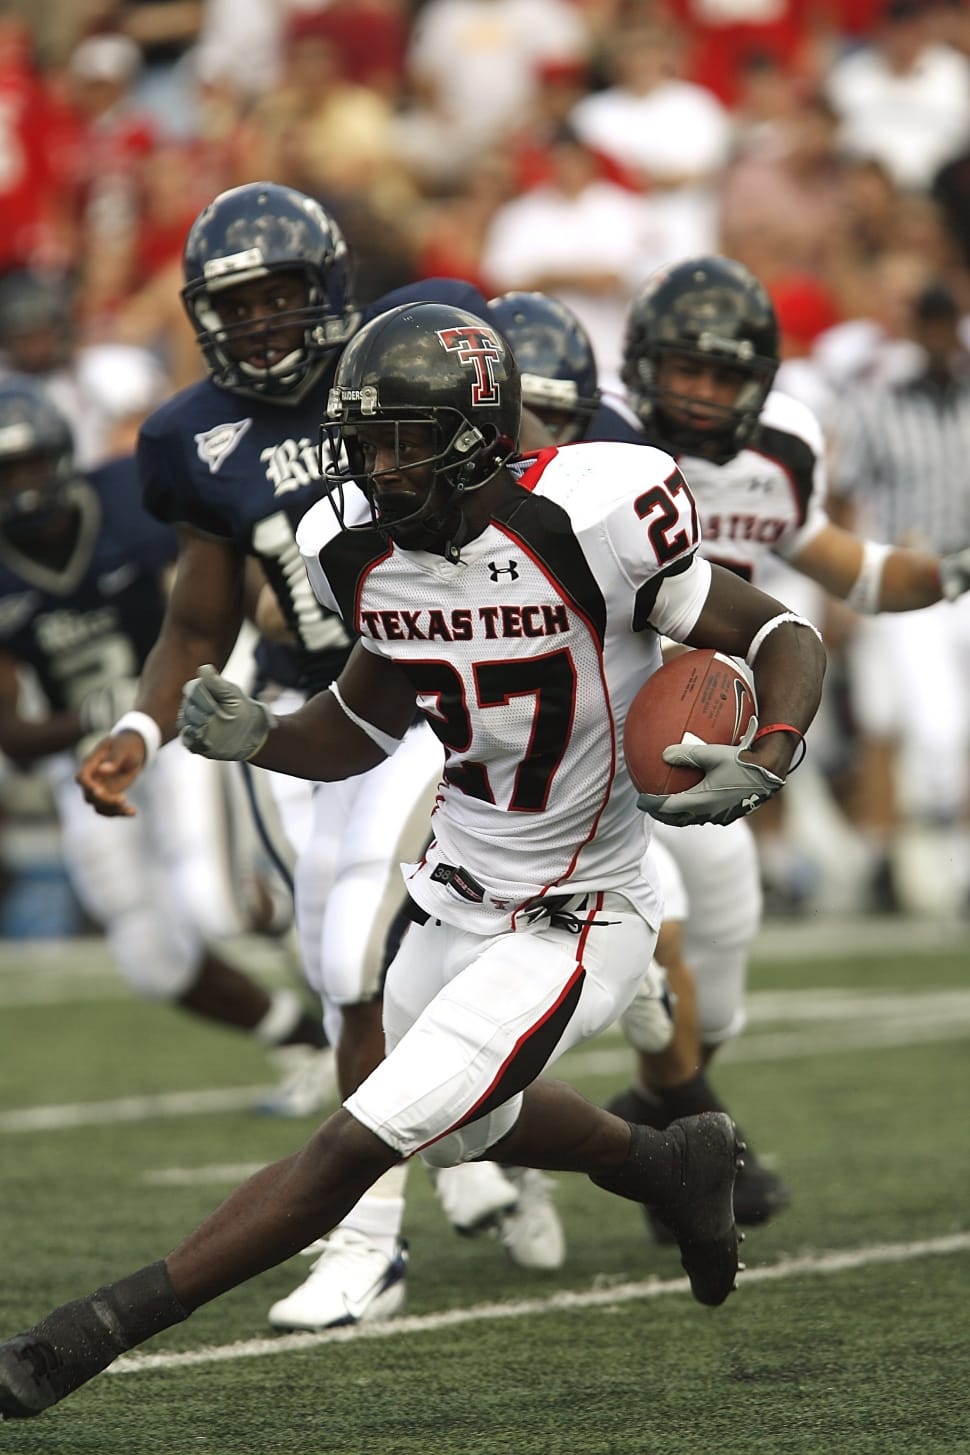 texas tech 27 under amour football player preview